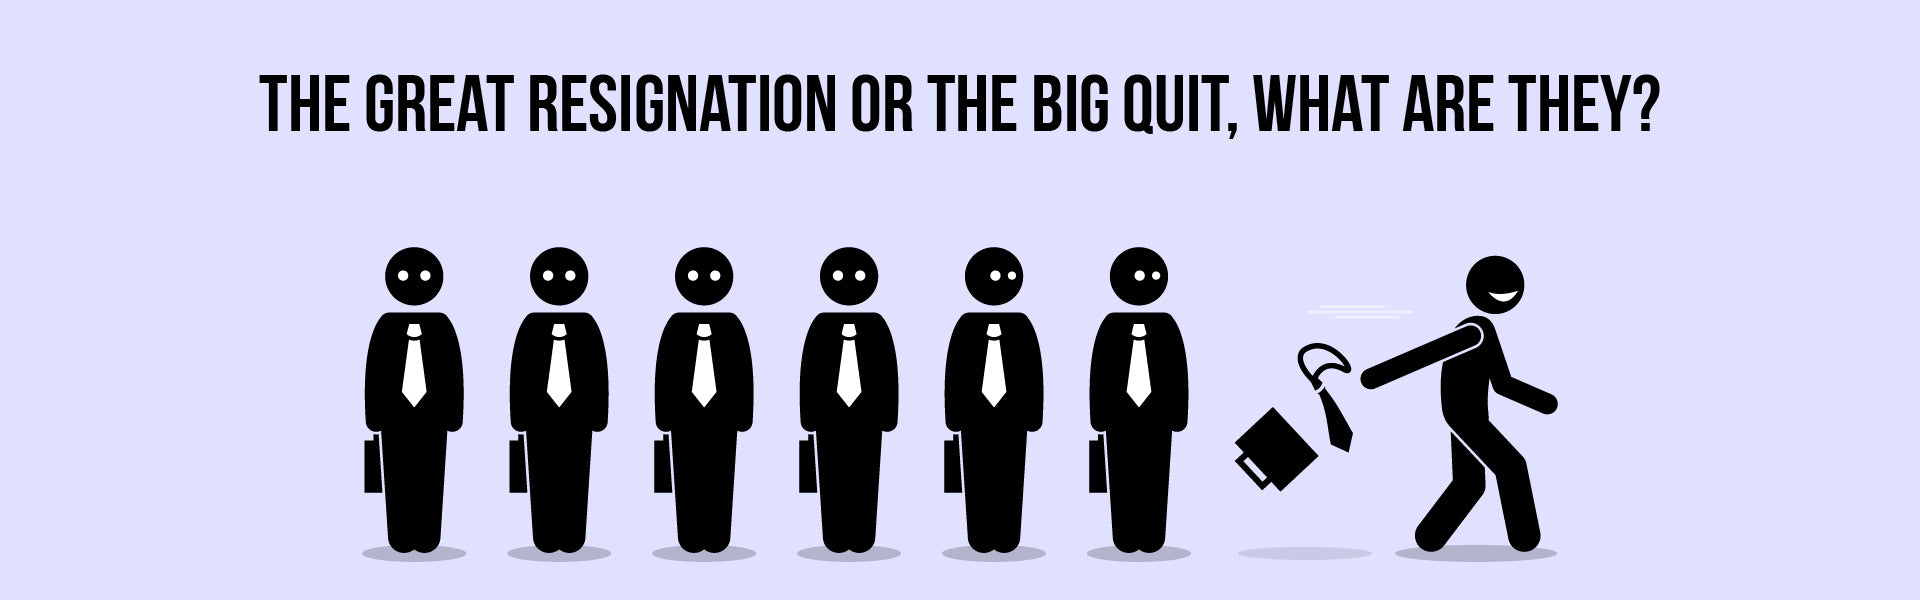 The Great Resignation or the Big Quit, what are they?